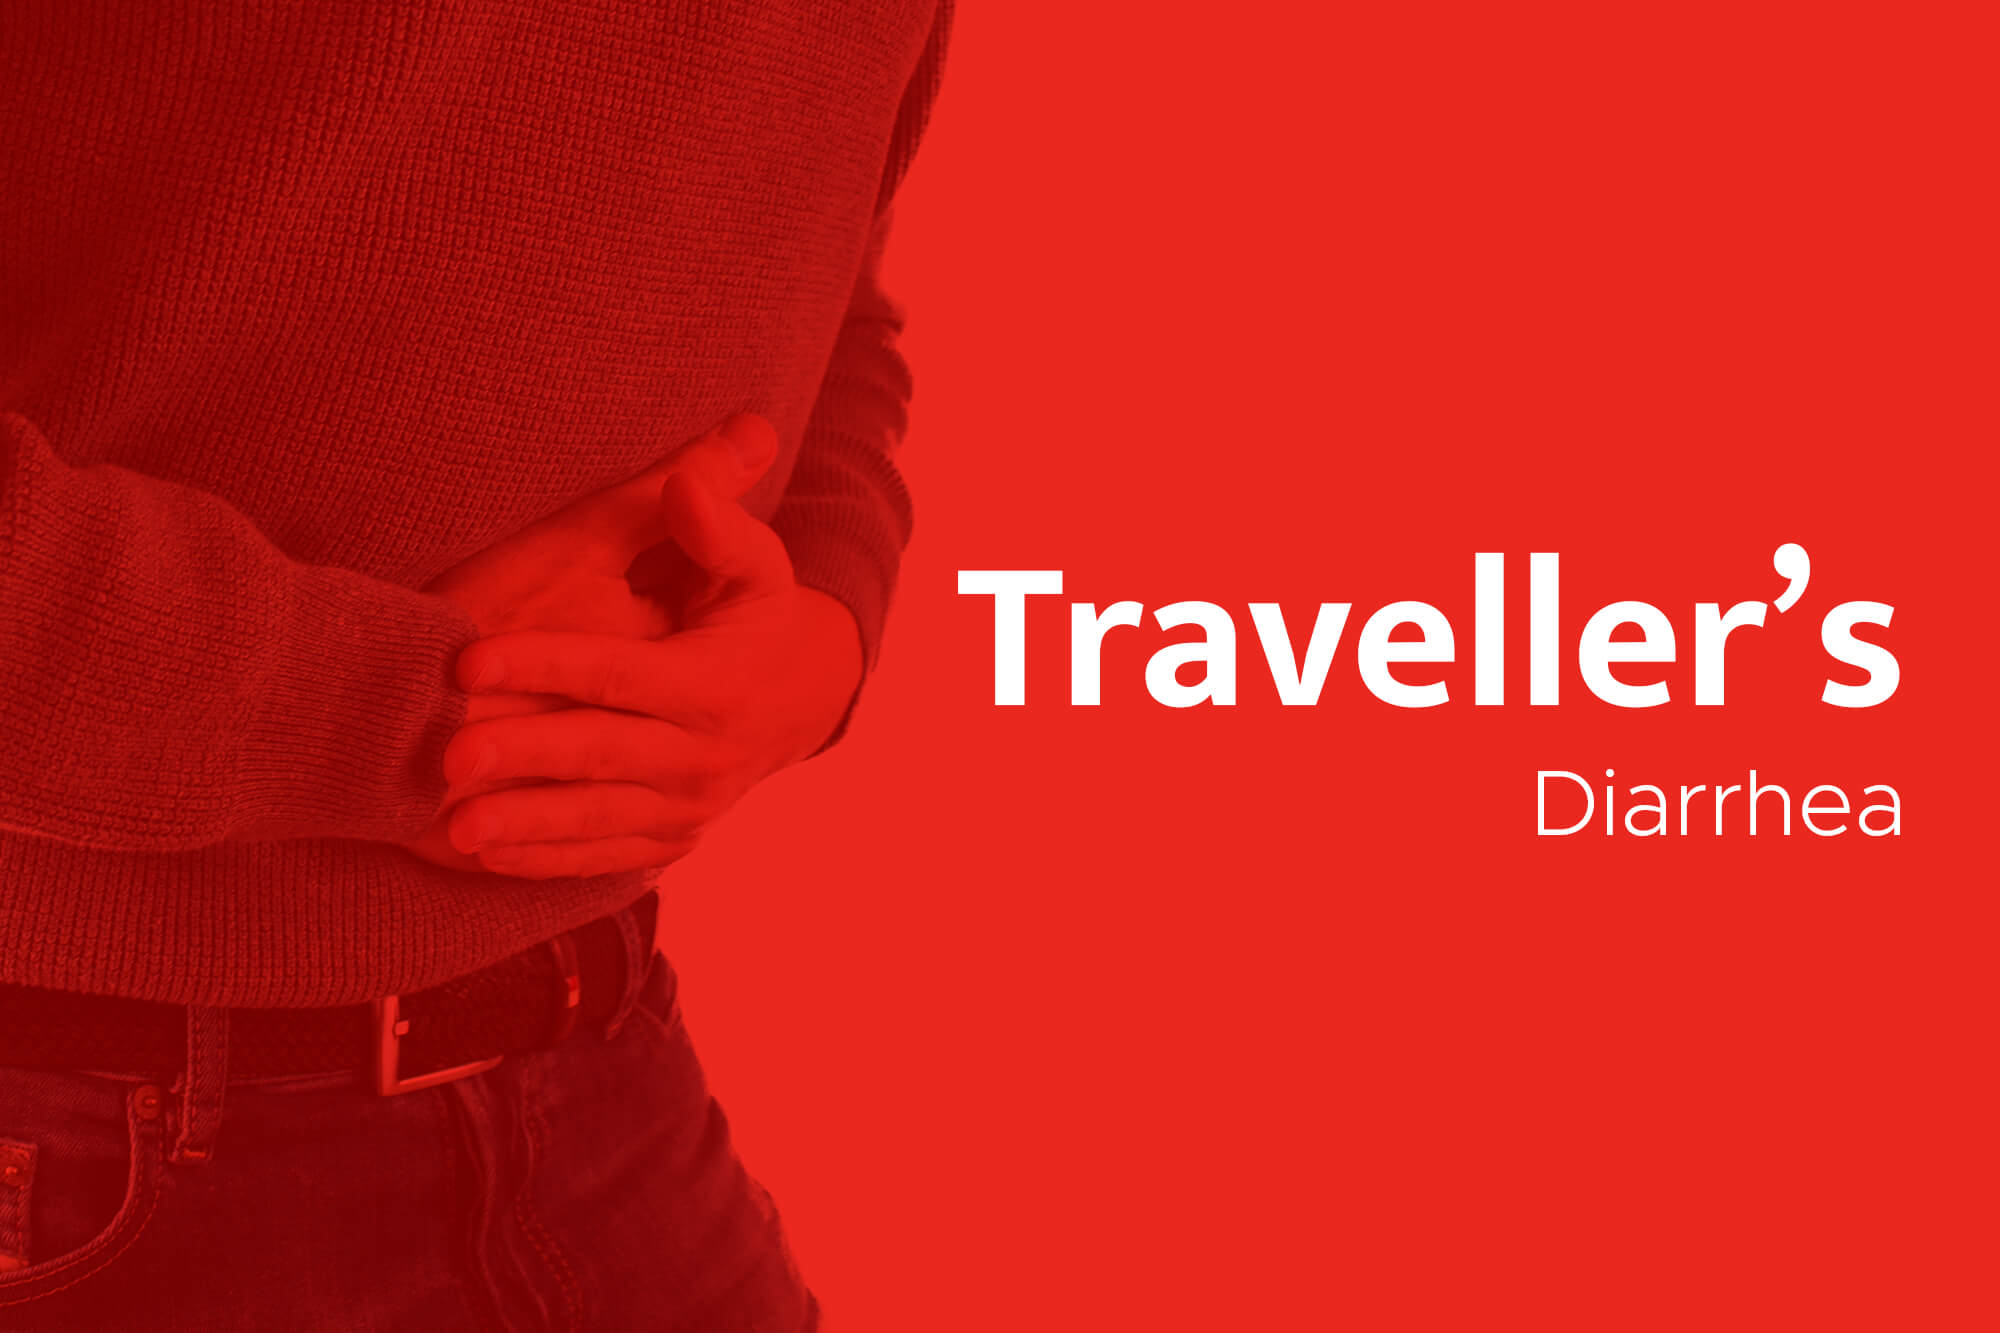 Oh Crap! – Coping with Traveller’s Diarrhea